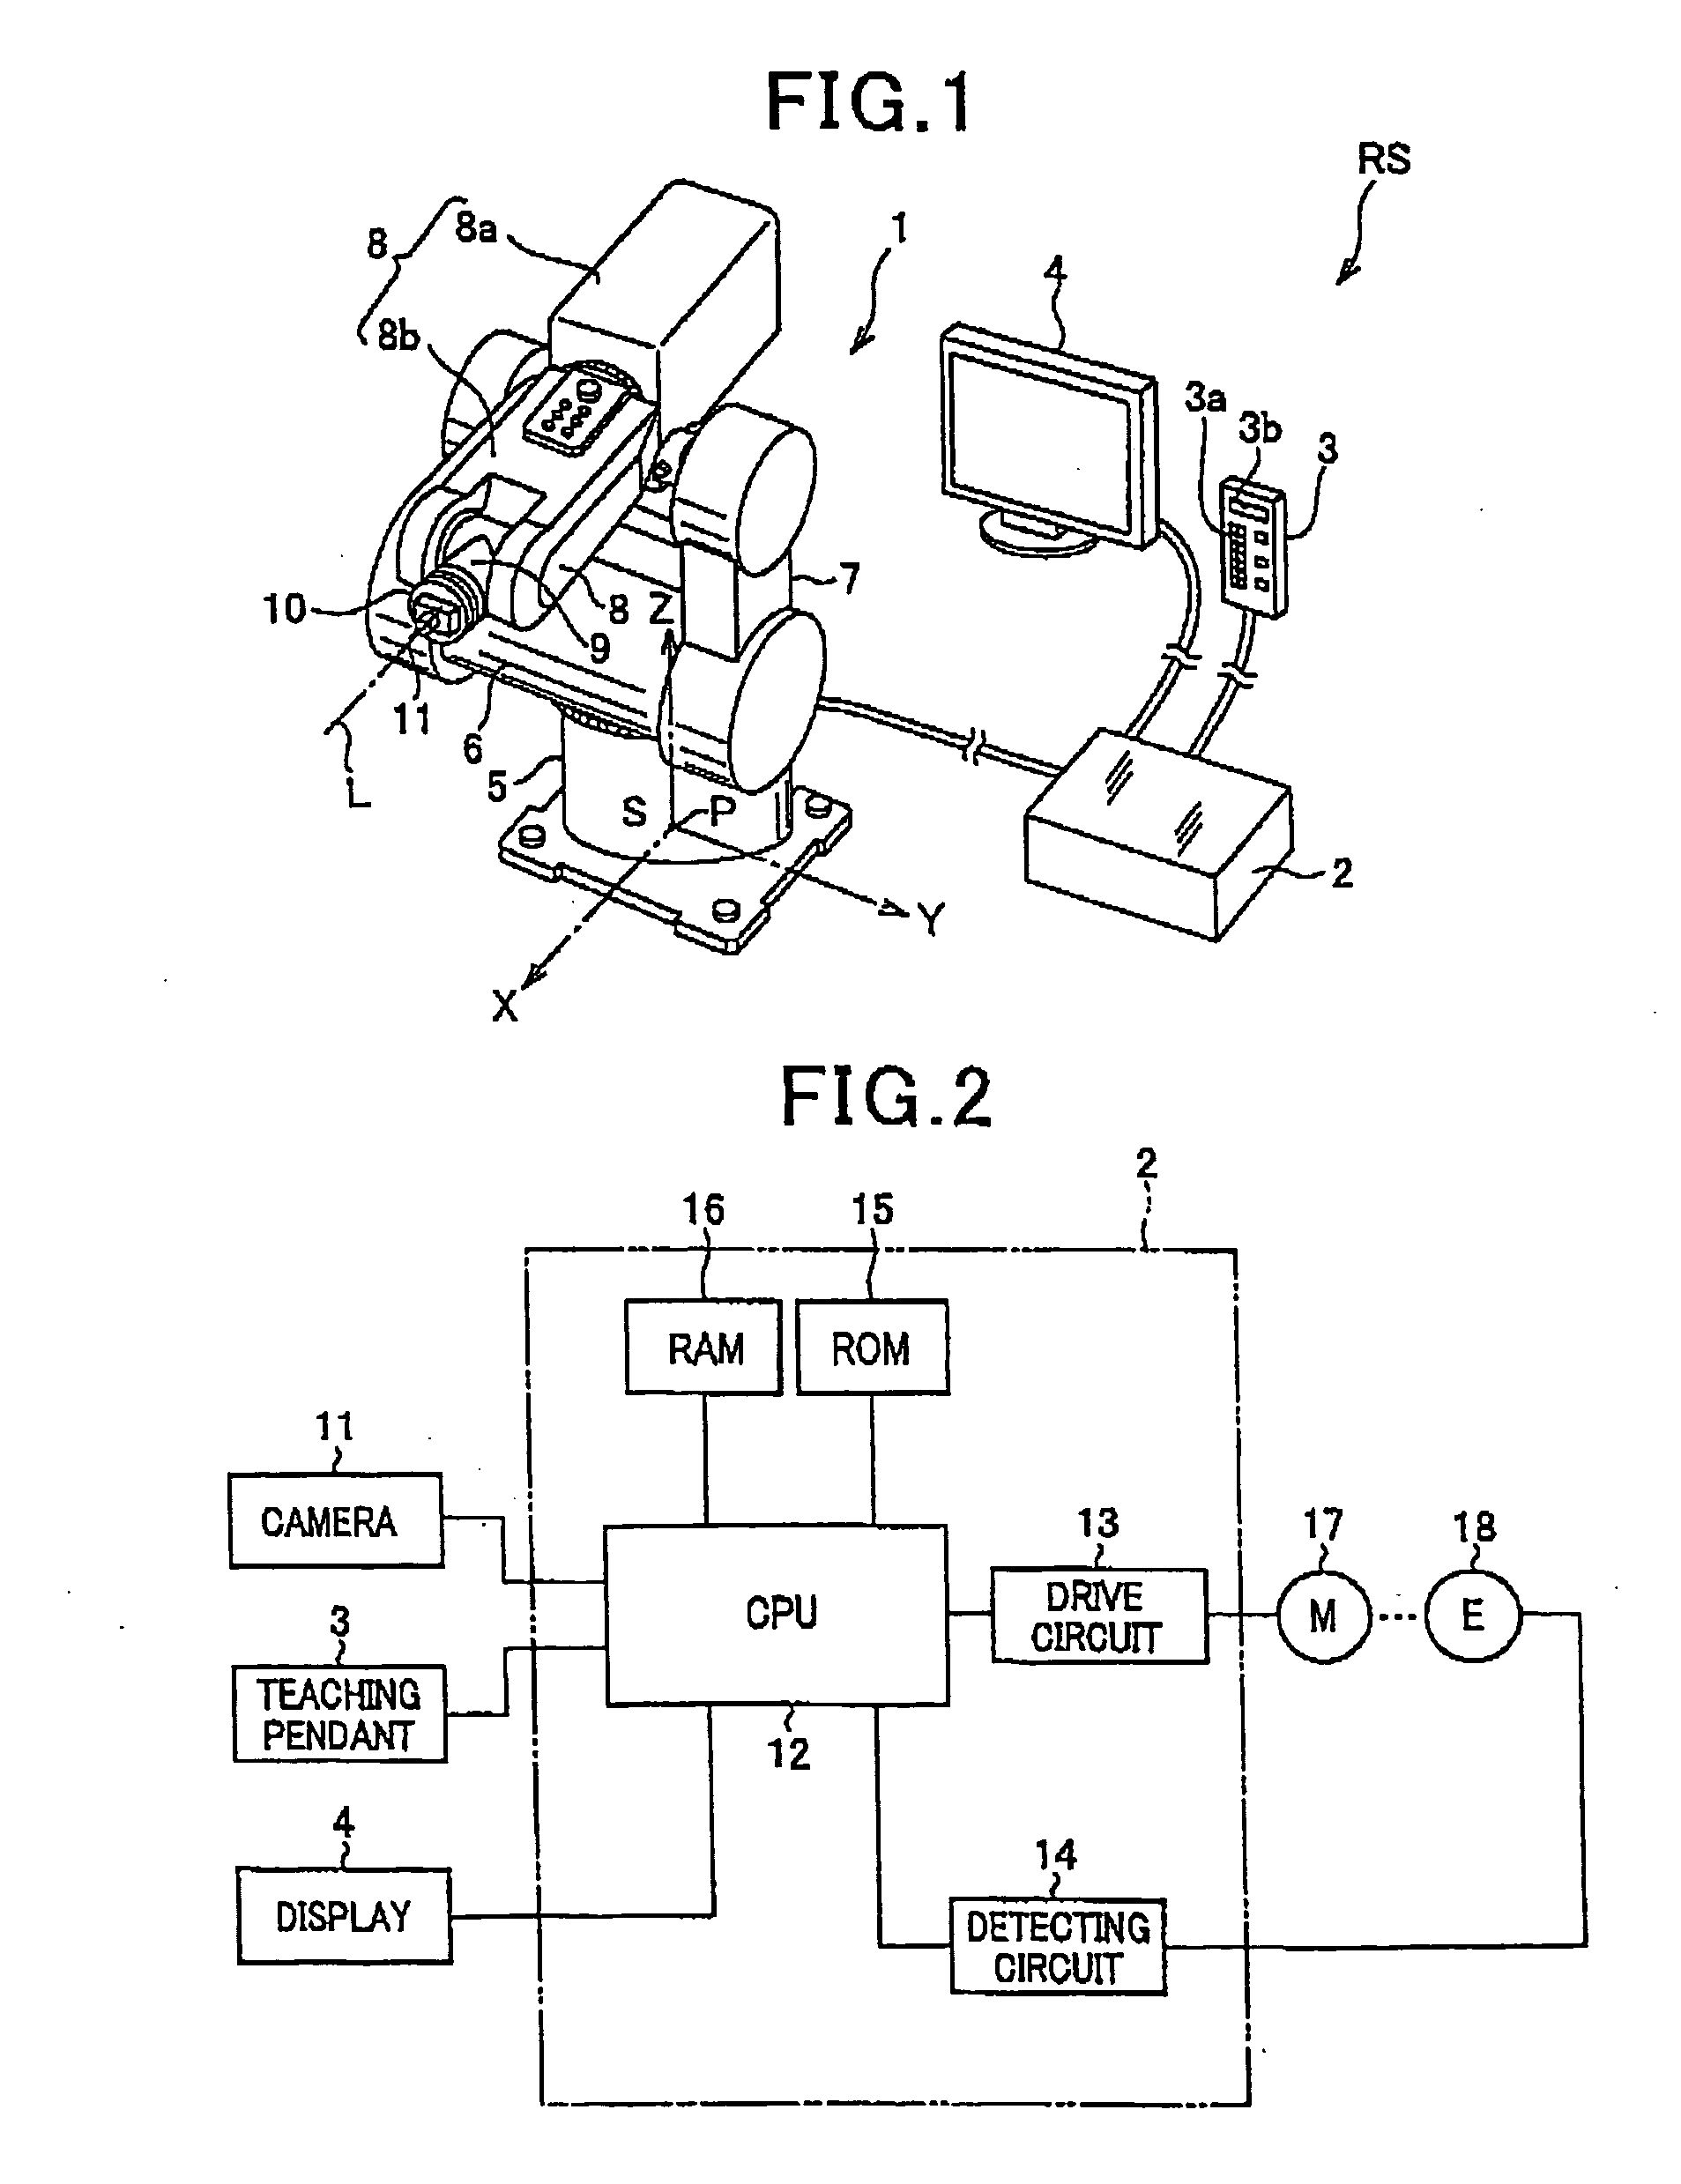 Apparatus for determining pickup pose of robot arm with camera